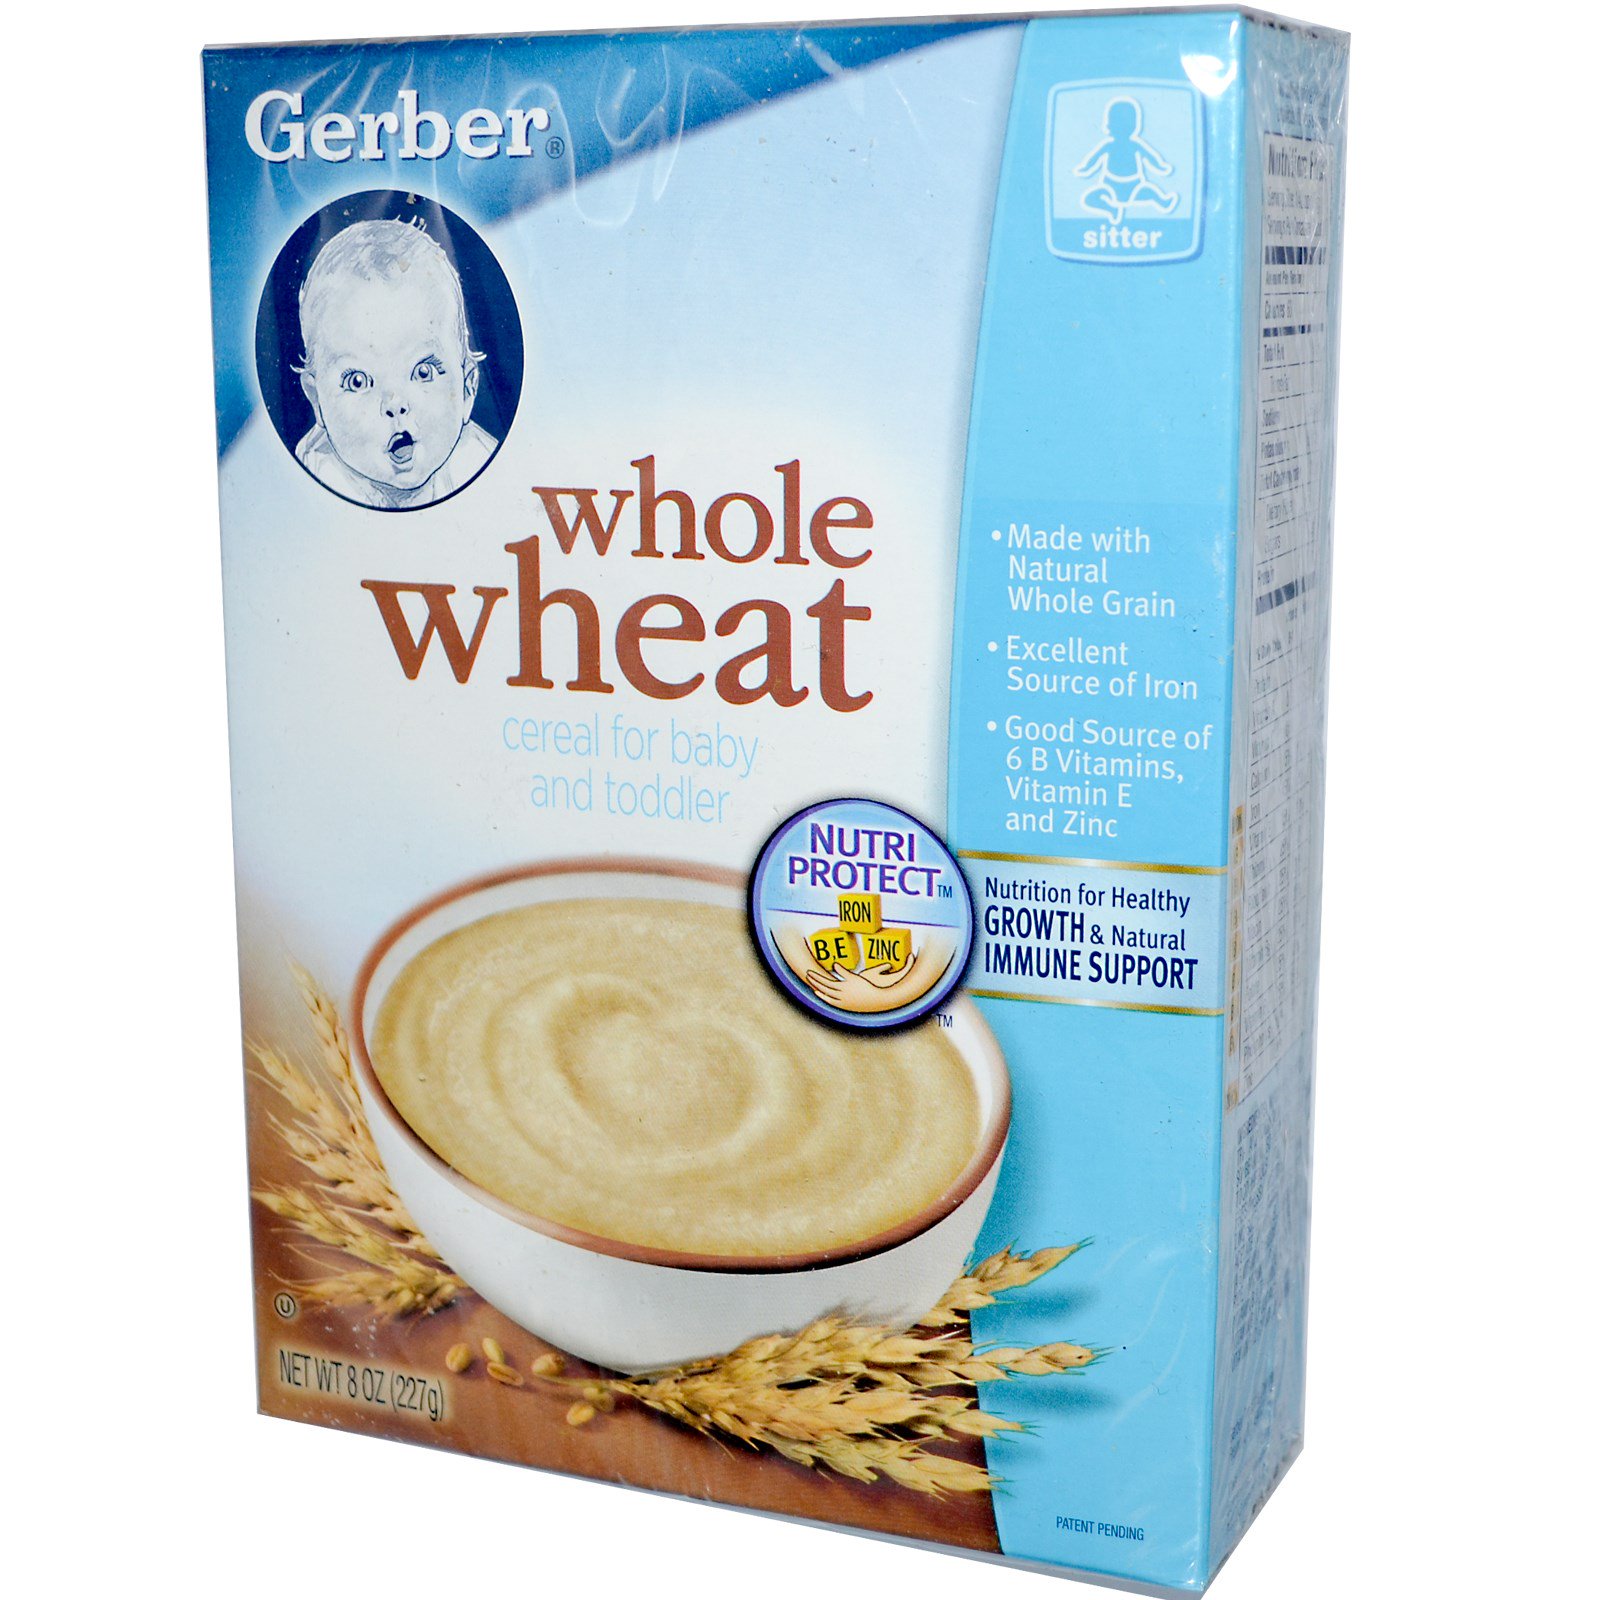 Gerber, Cereal for Baby and Toddler, Whole Wheat, 8 oz (227 g) - iHerb